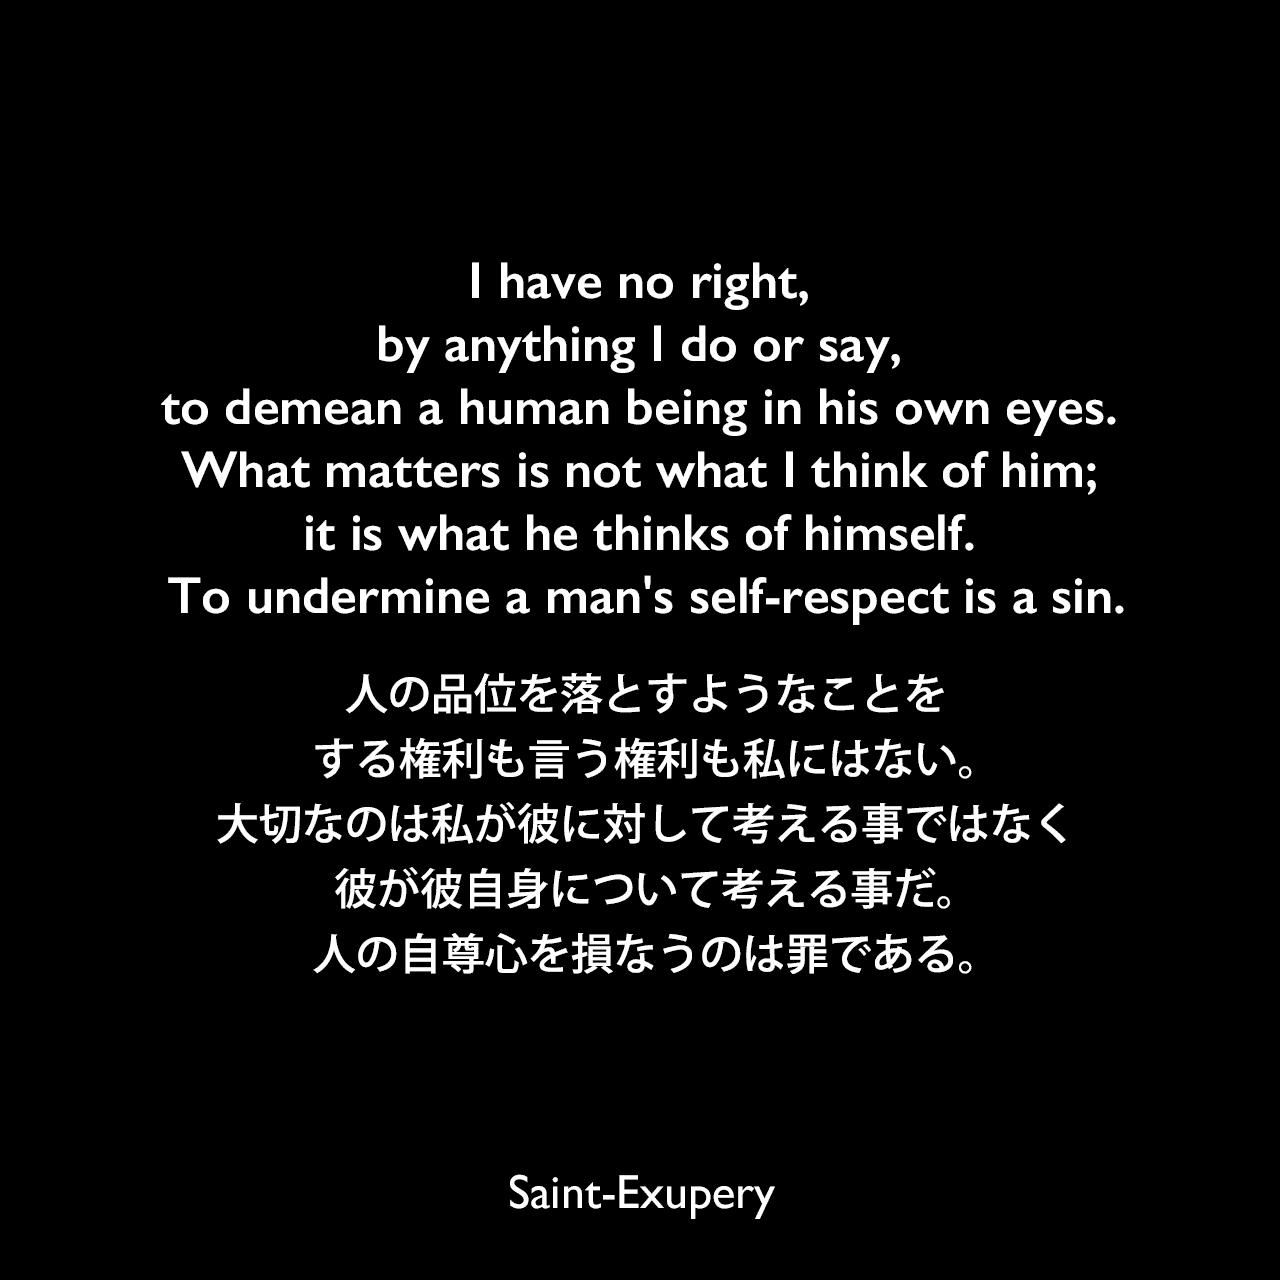 I have no right, by anything I do or say, to demean a human being in his own eyes. What matters is not what I think of him; it is what he thinks of himself. To undermine a man's self-respect is a sin.人の品位を落とすようなことをする権利も言う権利も私にはない。大切なのは私が彼に対して考える事ではなく、彼が彼自身について考える事だ。人の自尊心を損なうのは罪である。Saint-Exupery